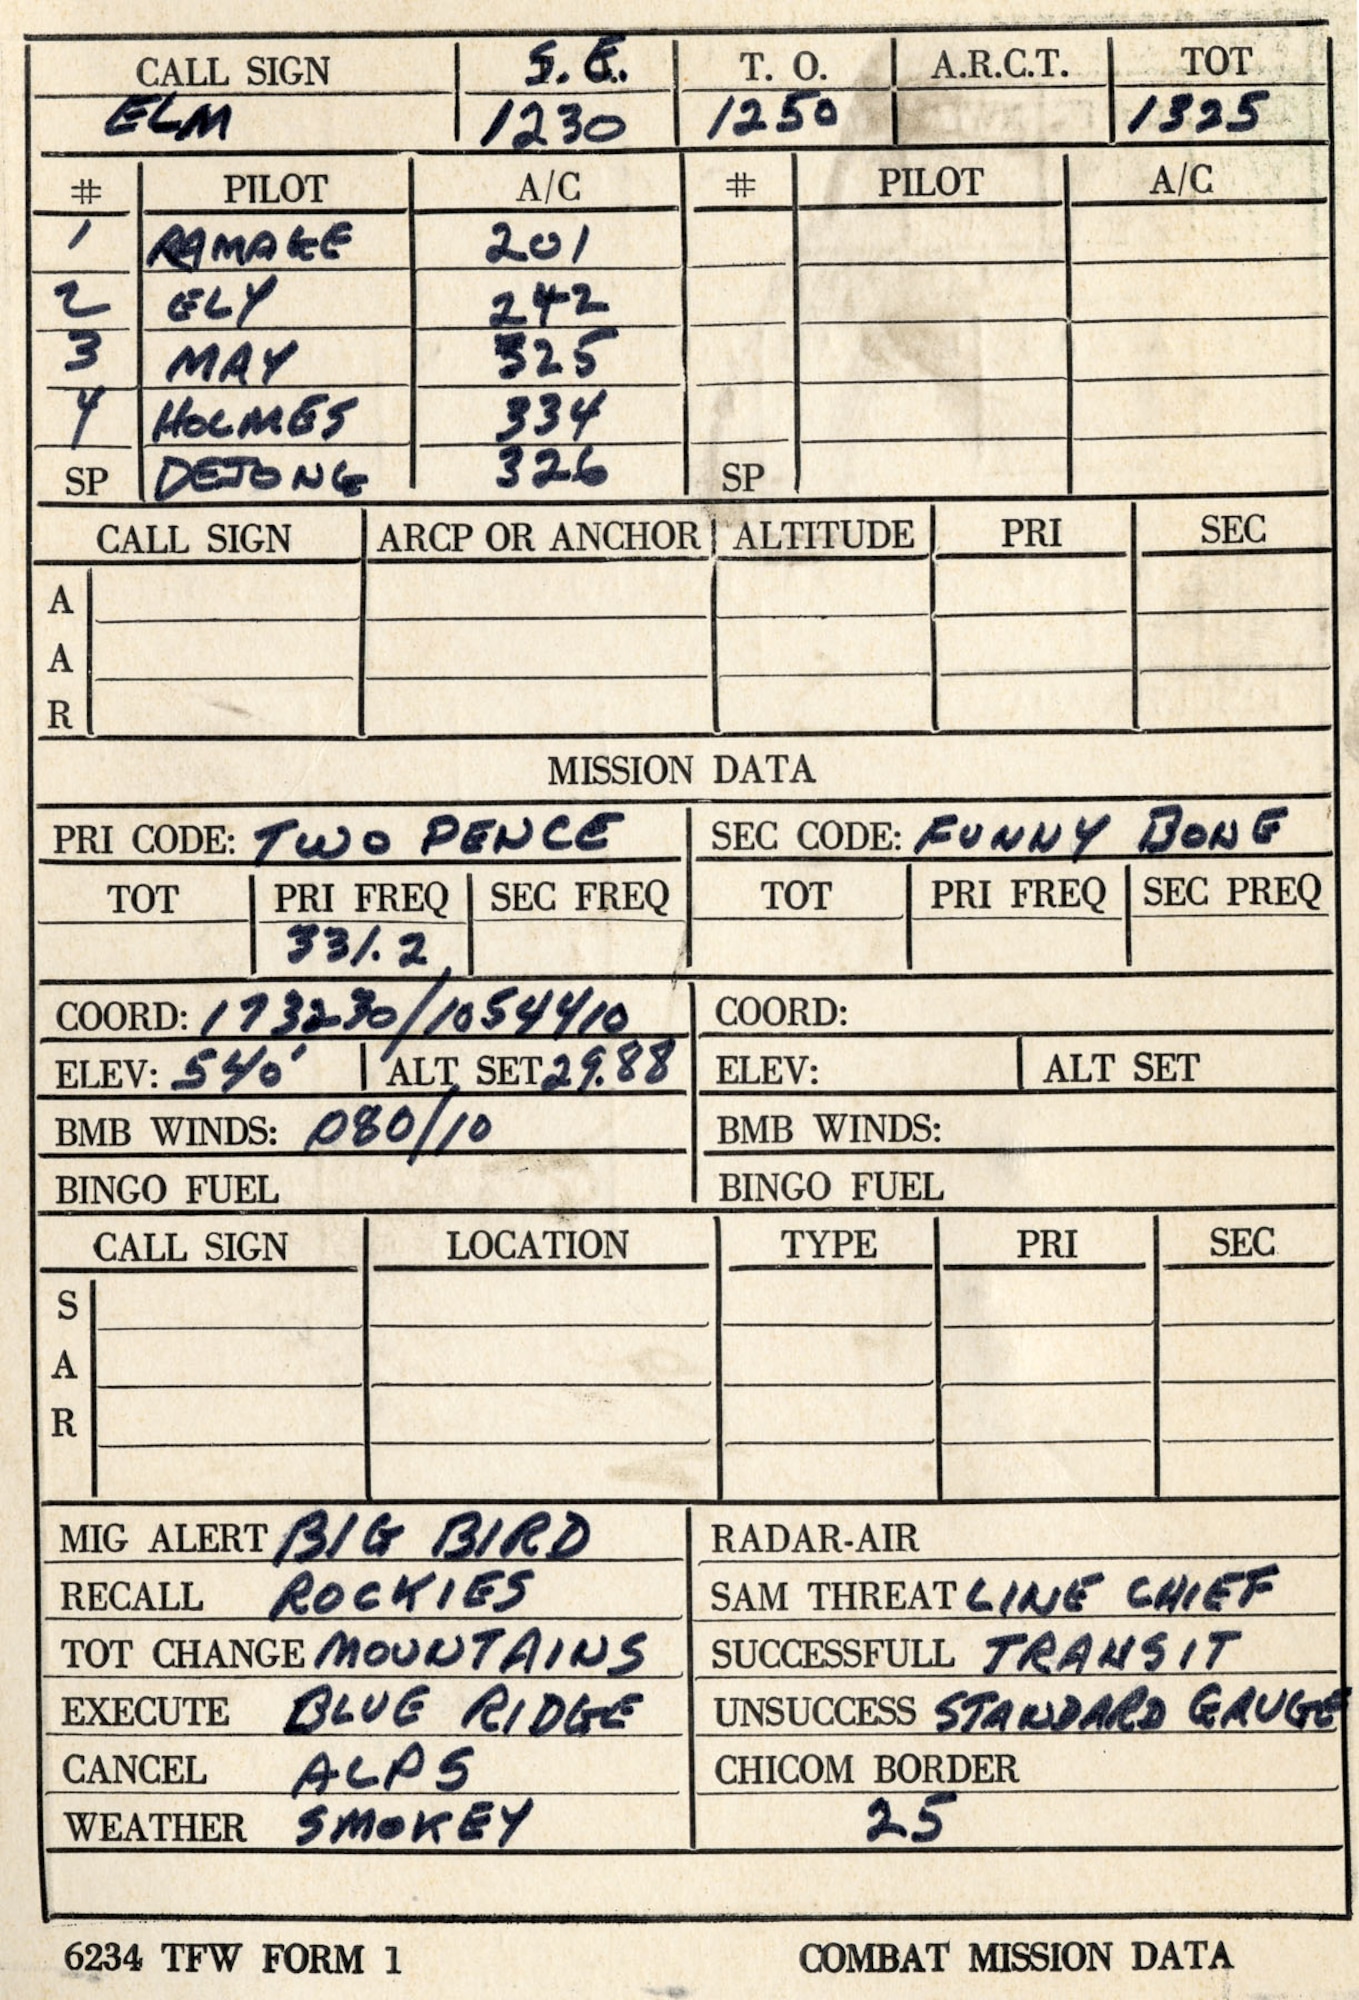 Capt. May’s mission card that he carried on the 100th mission. (U.S. Air Force photo)